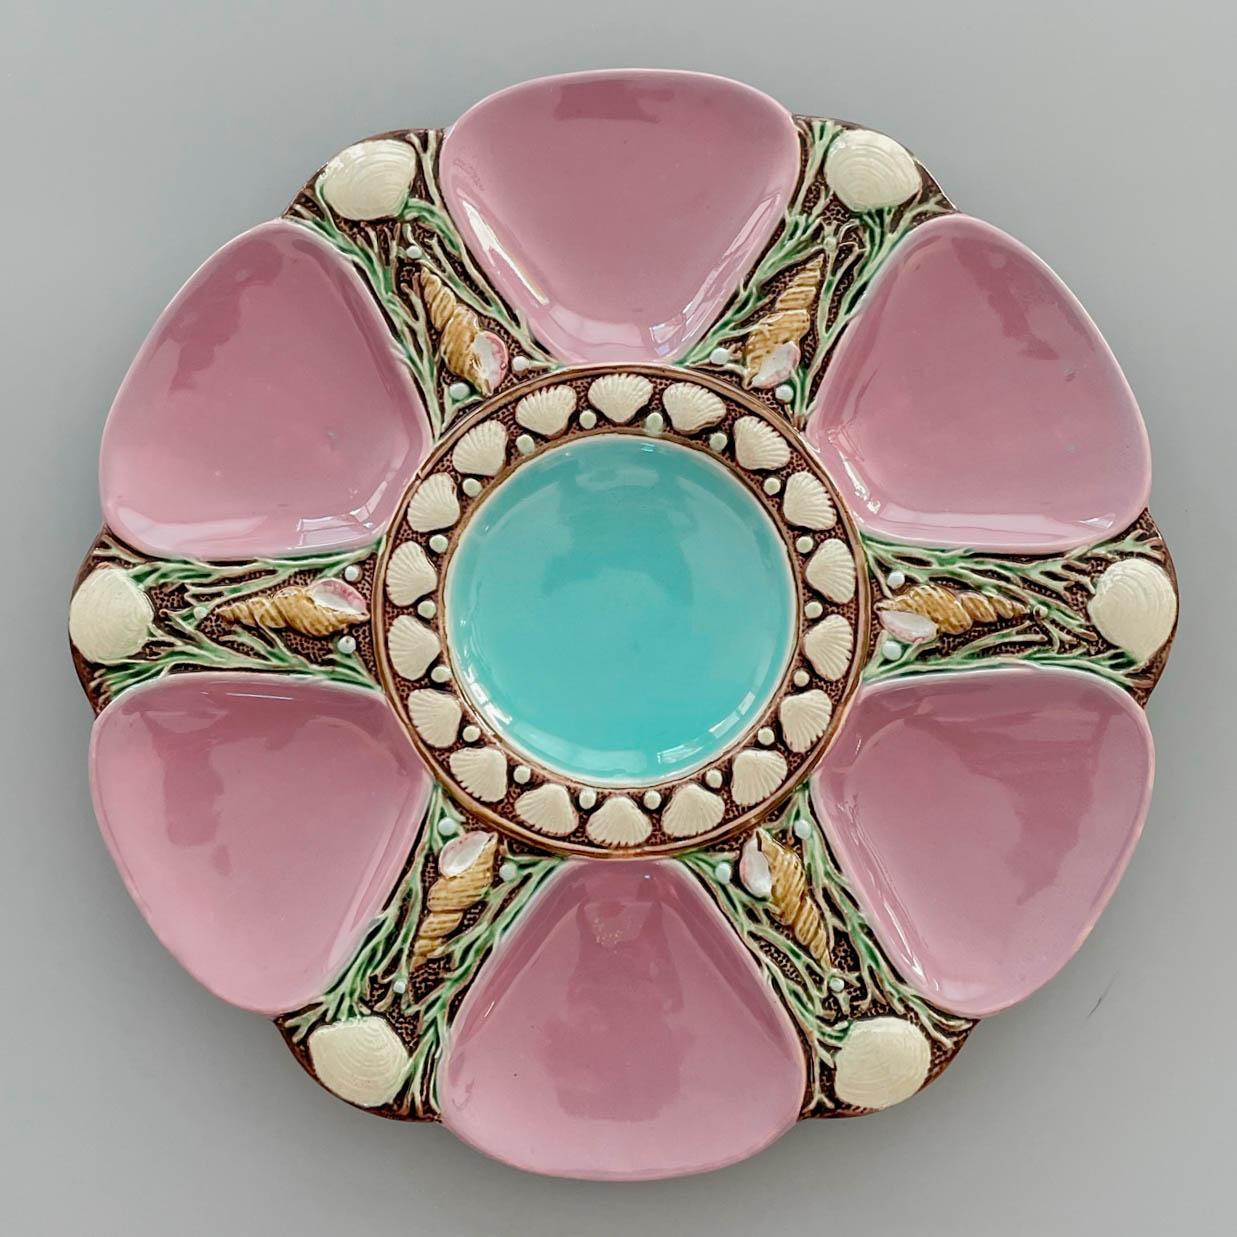 A 19th Century English Minton Majolica oyster plate, with an aqua blue center well and six mauve pink oyster wells separated by seashells, scallops and green seaweed in relief on brown ground. Green glazed underside with Minton stamp. There is an